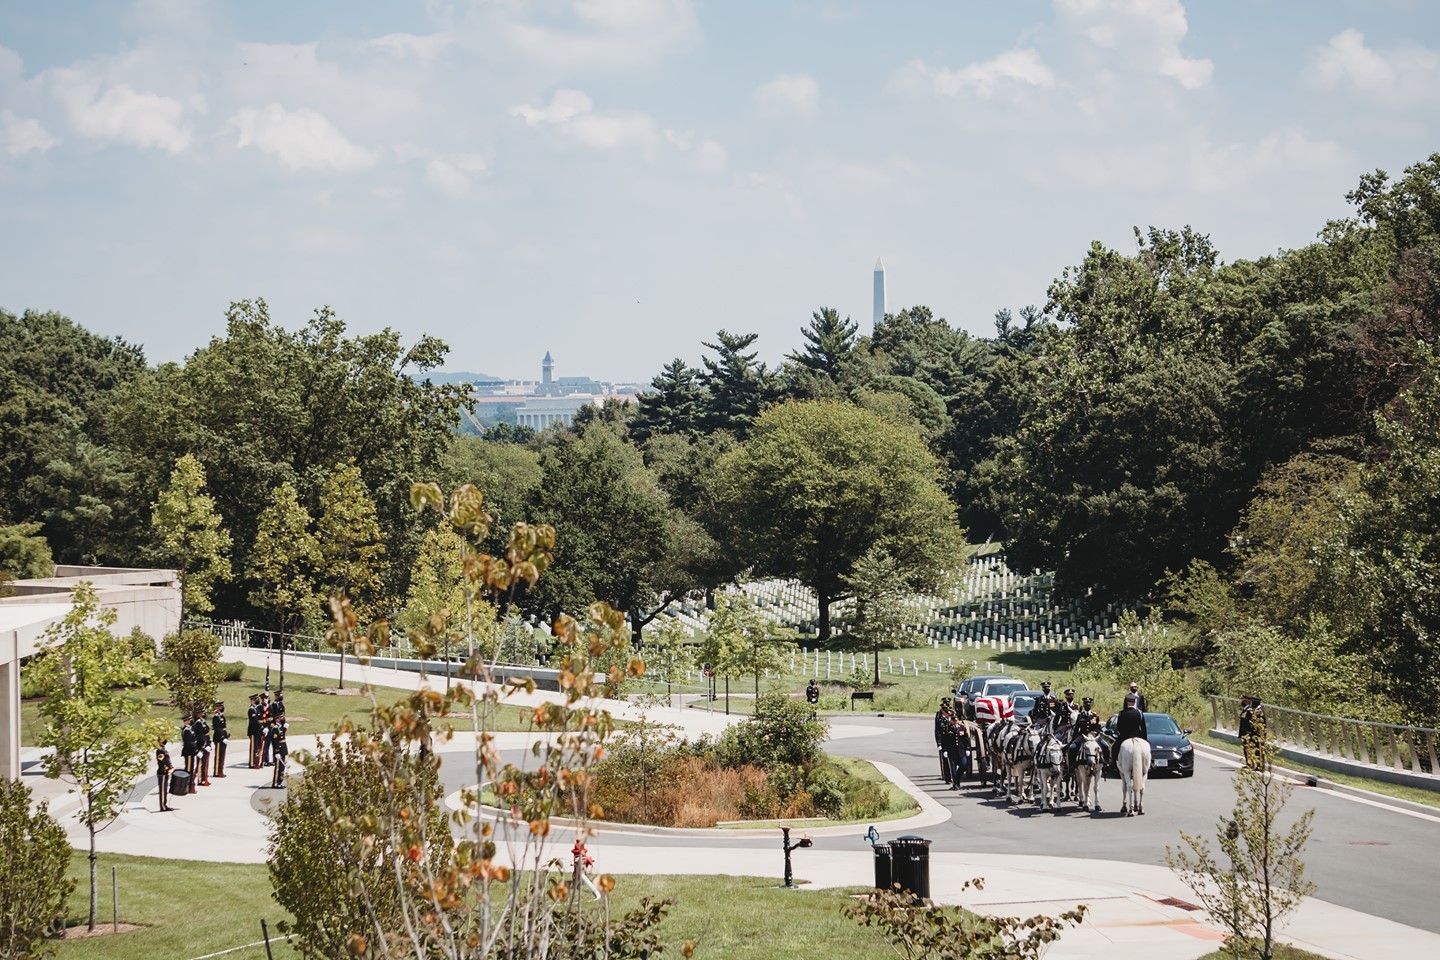 Washington DC, the Washington Monument, and the Lincoln Memorial can be seen behind a full honors service preparing to proceed to the gravesite in the Millennium Section of Arlington National Cemetery.